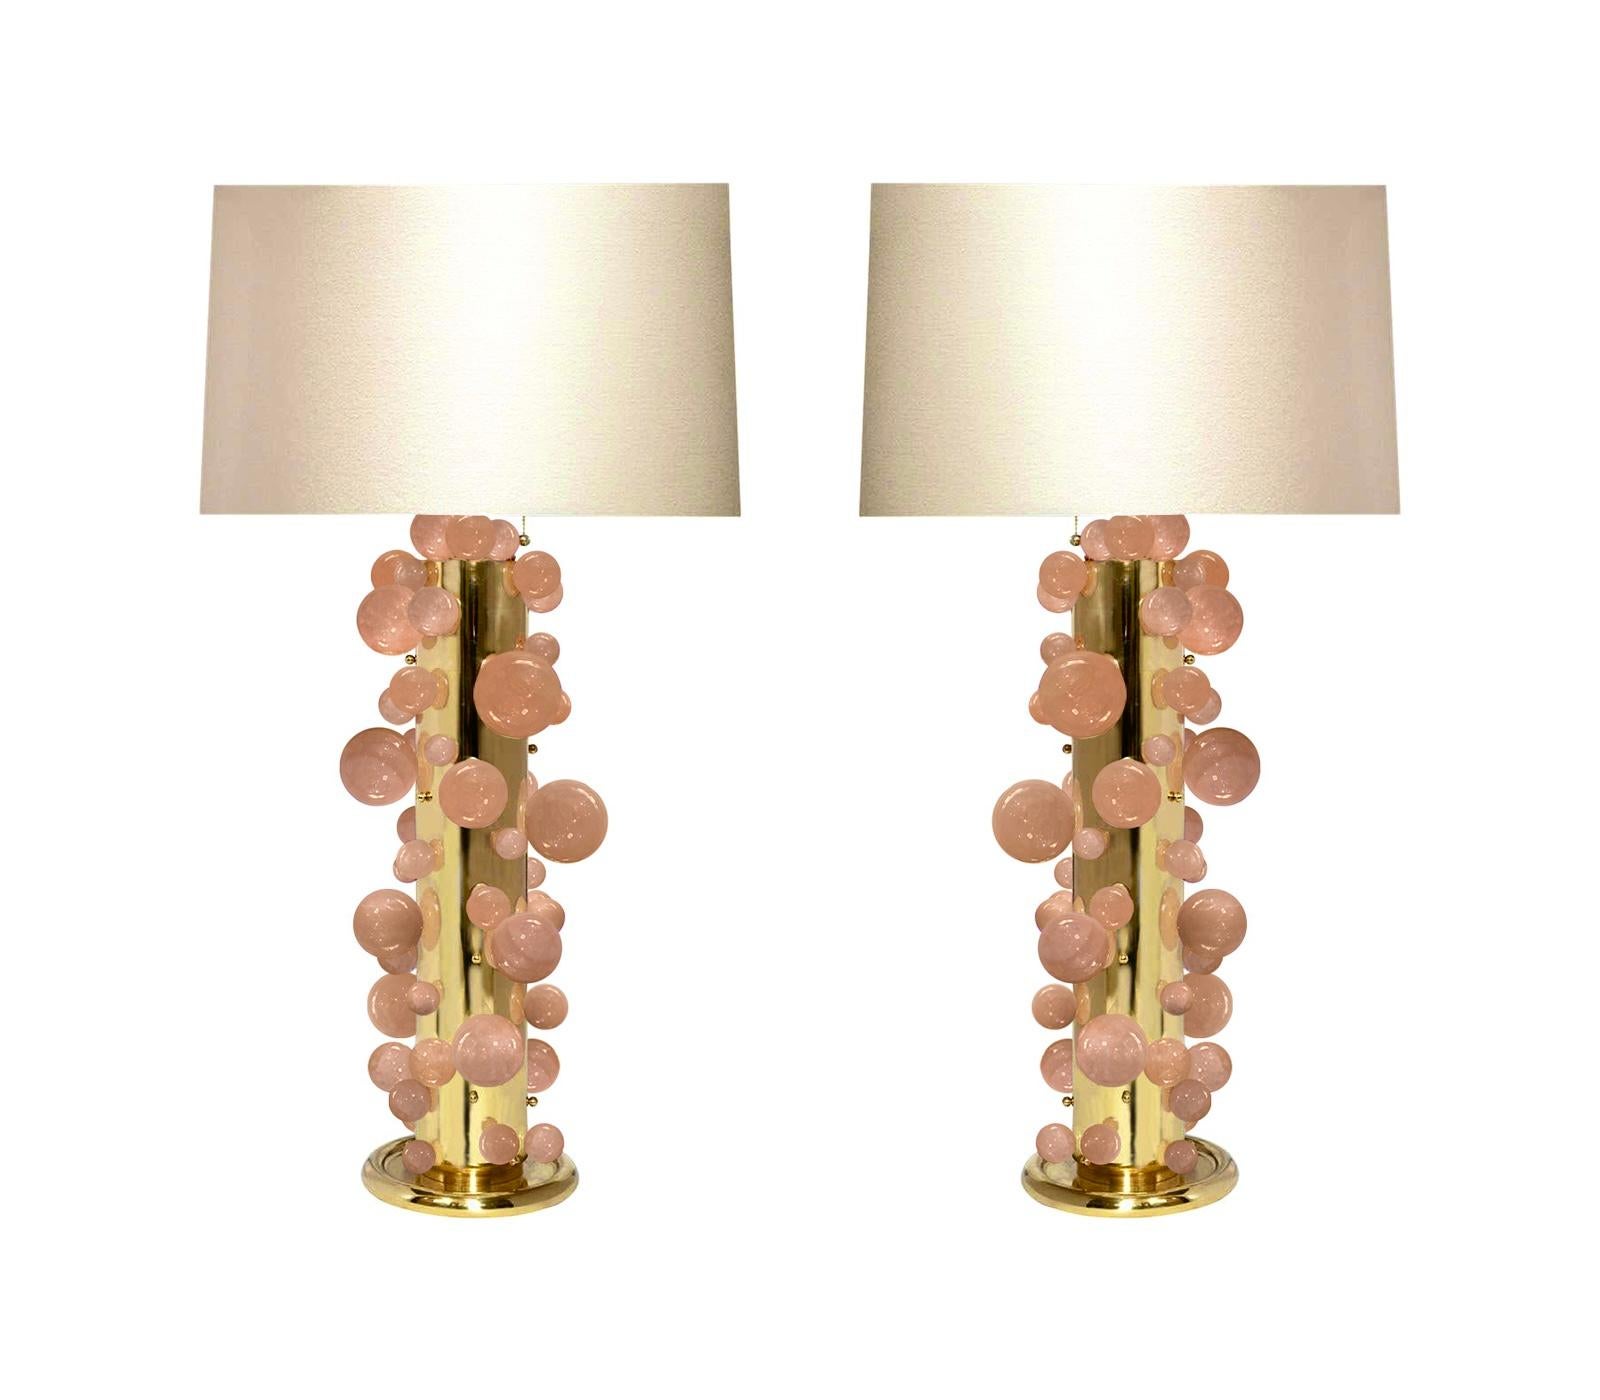 A tall pair of pink rock crystal quartz bubble lamps with polished brass frames. Created by Phoenix Gallery, NYC. Each lamp installed two sockets. To the top of the rock crystal 25.75